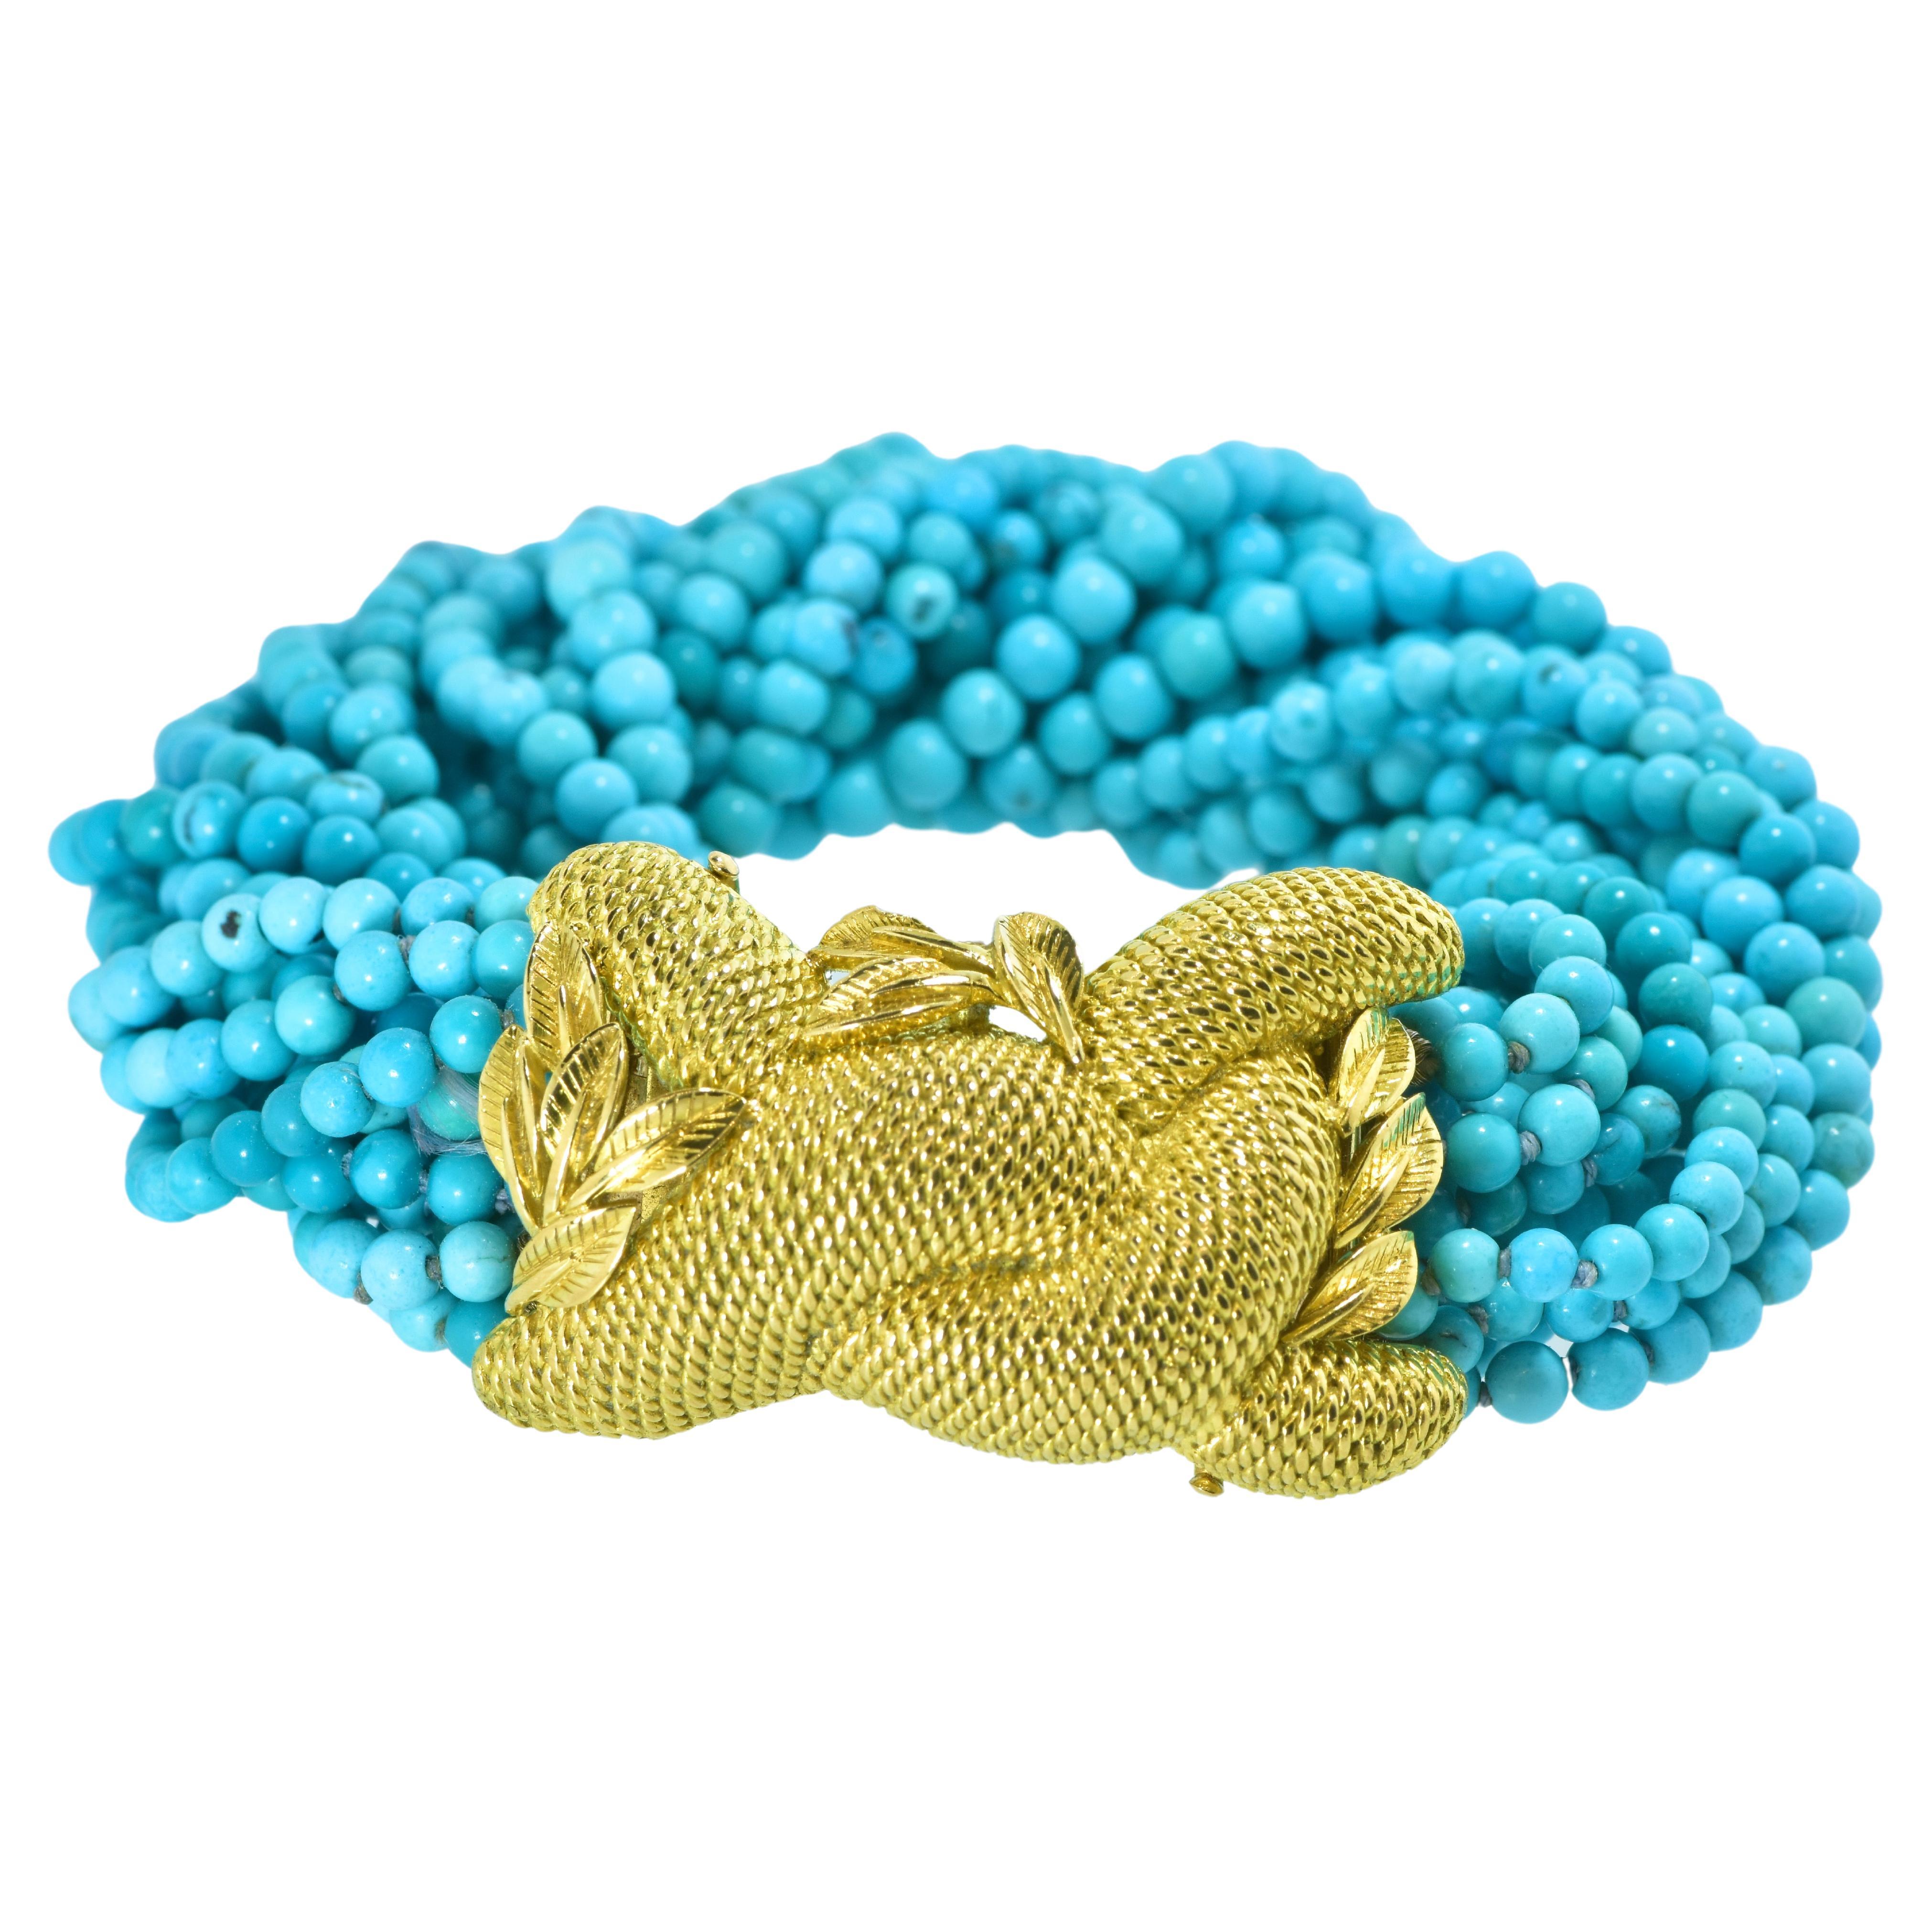 Fine Turquoise Bead Torsade Bracelet Centering an 18K High Relief Clasp, c. 1965 For Sale